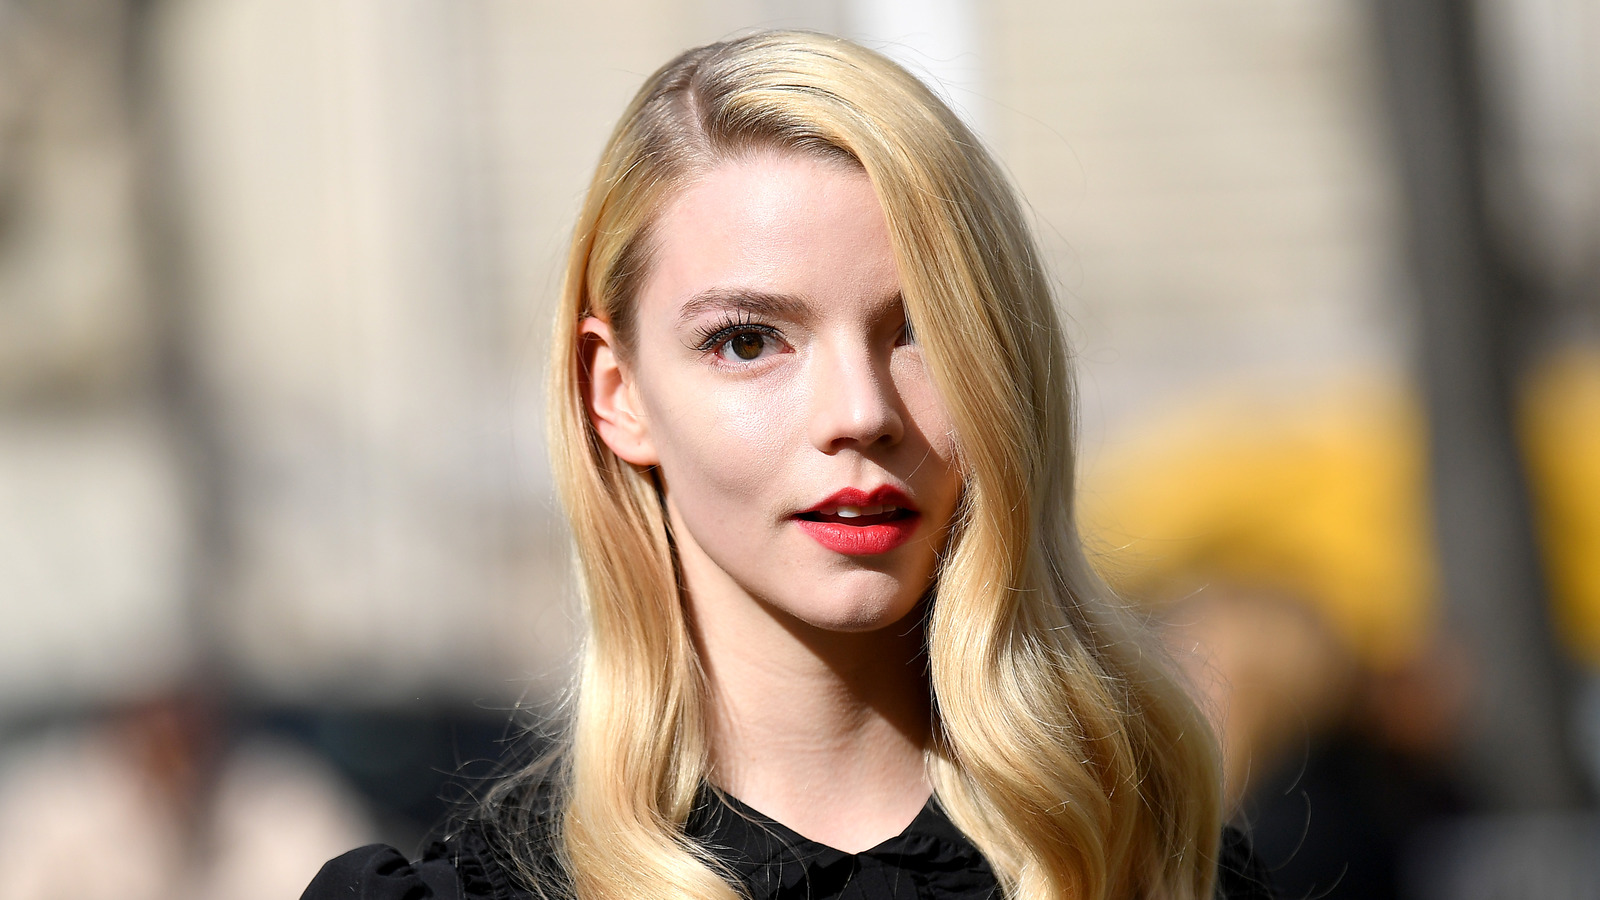 The Strange Way Anya Taylor Joy Was First Discovered